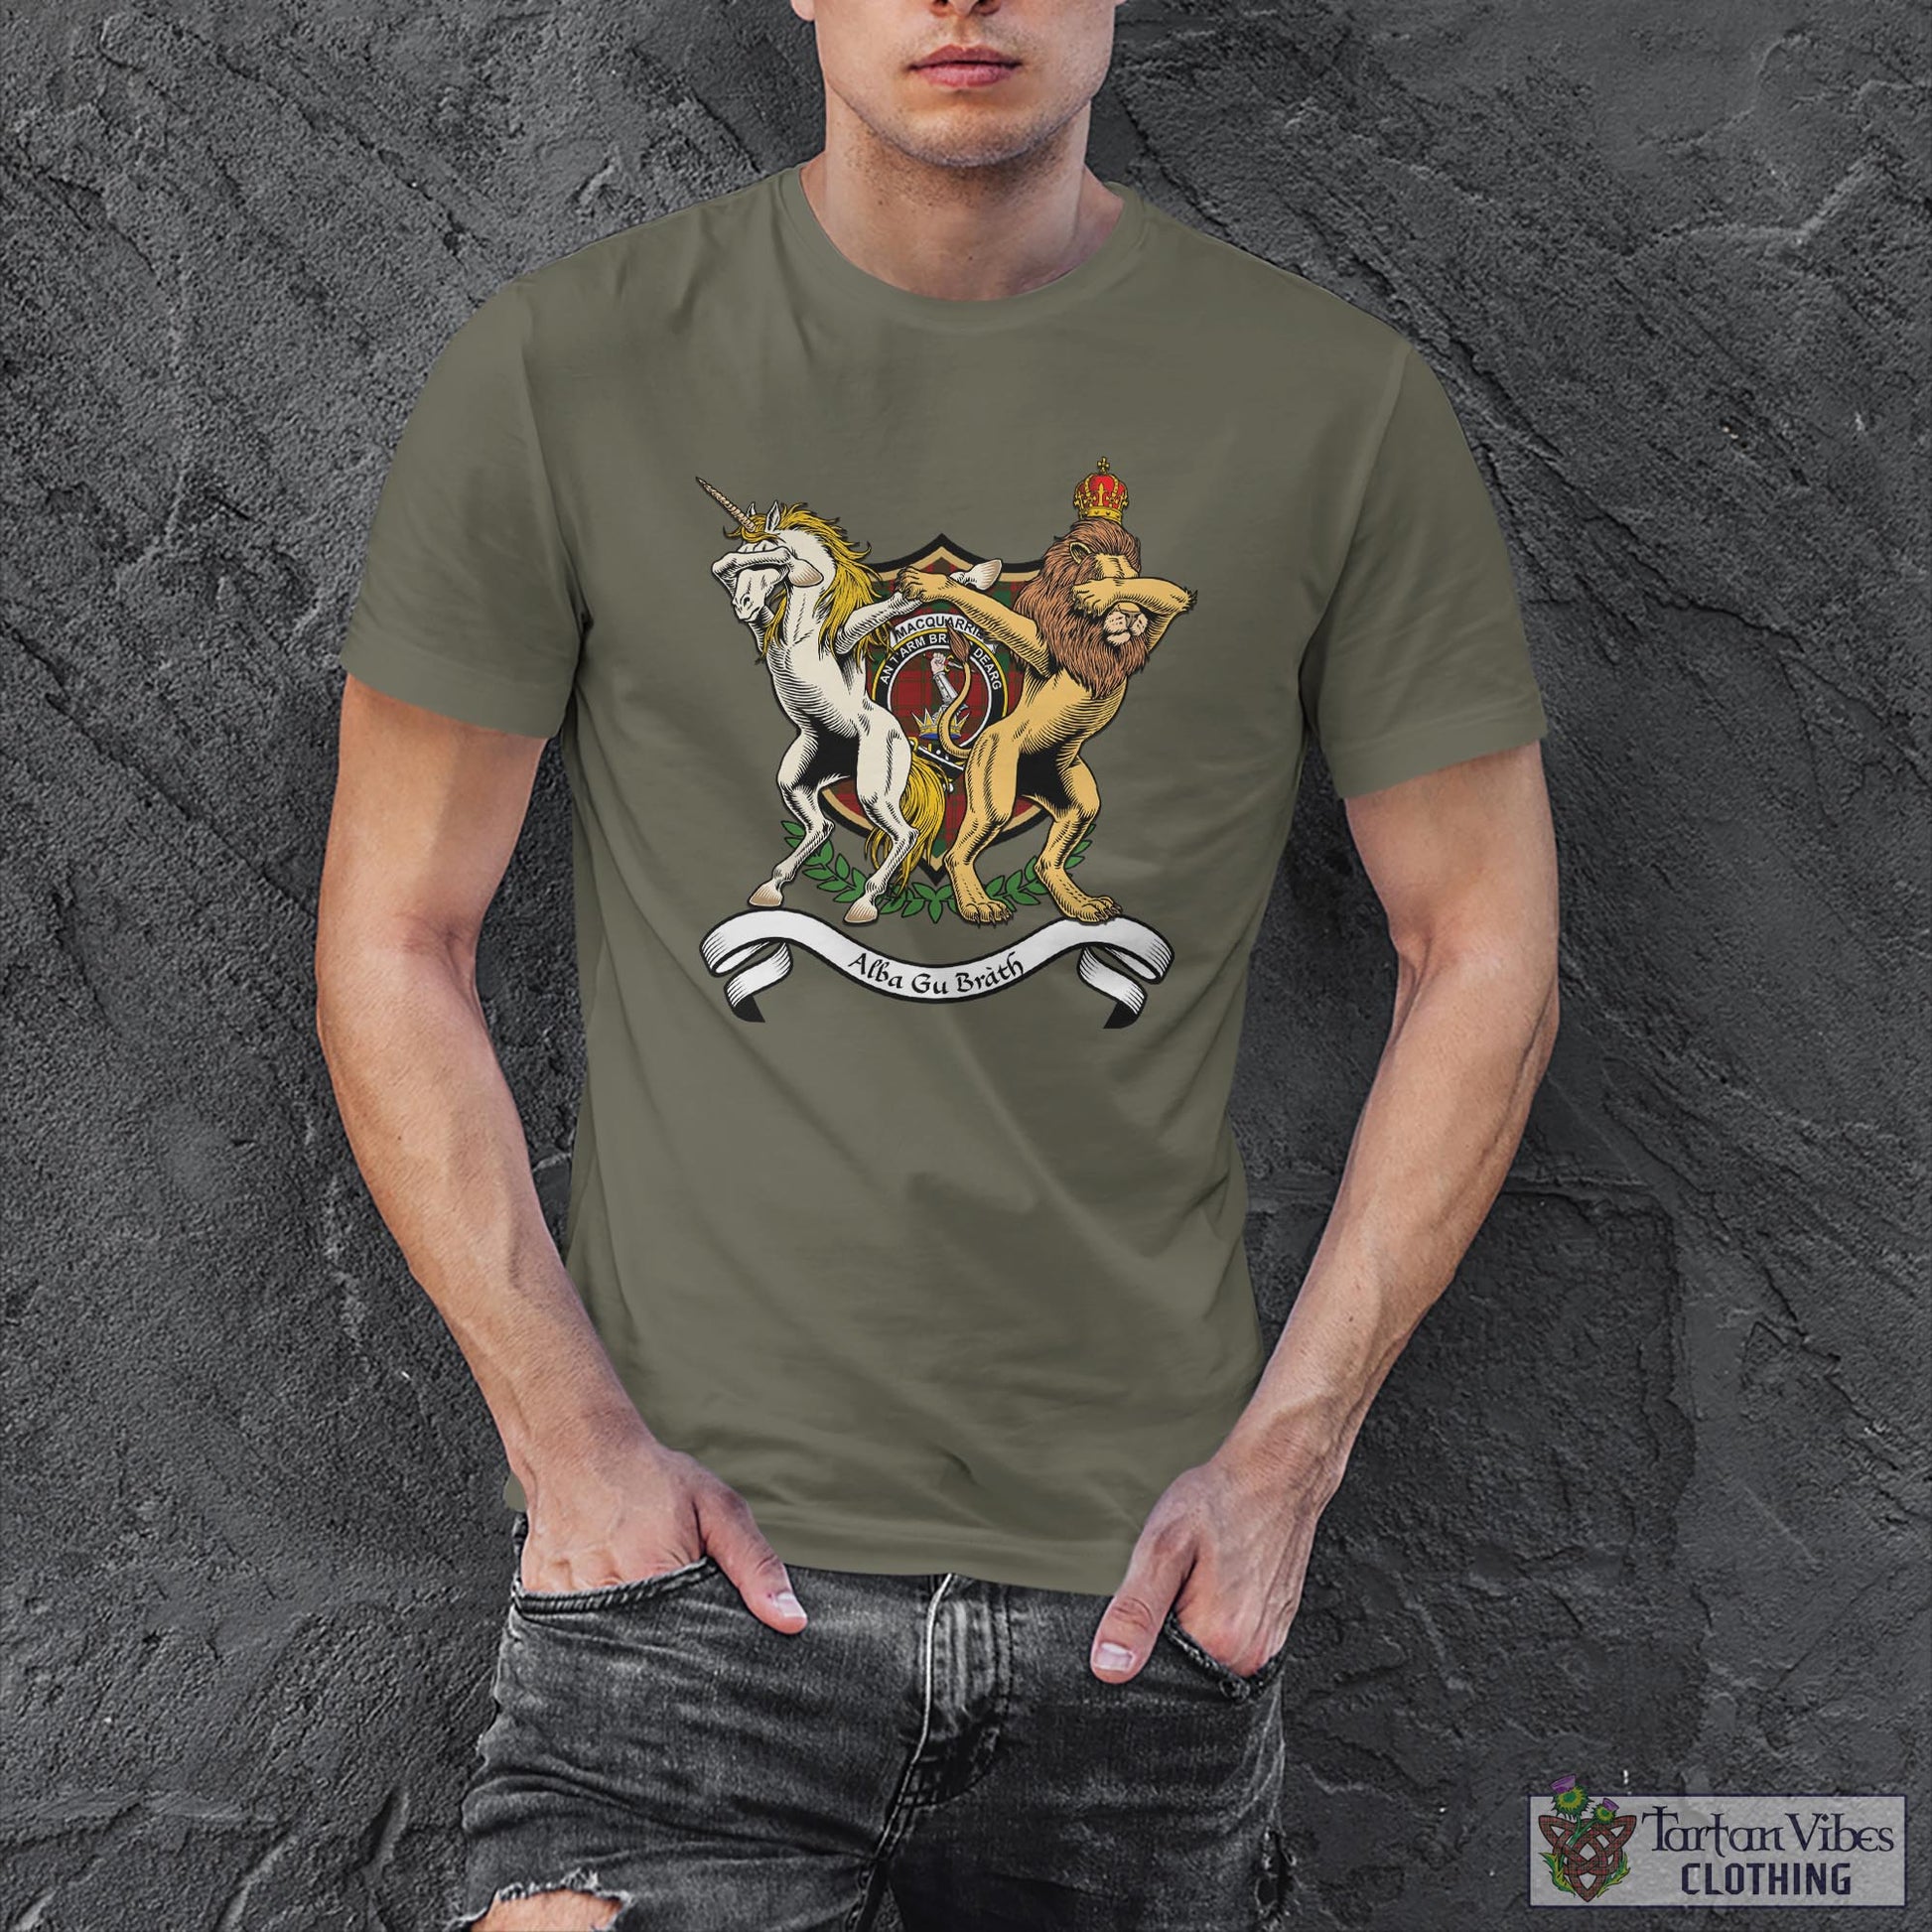 Tartan Vibes Clothing MacQuarrie Family Crest Cotton Men's T-Shirt with Scotland Royal Coat Of Arm Funny Style